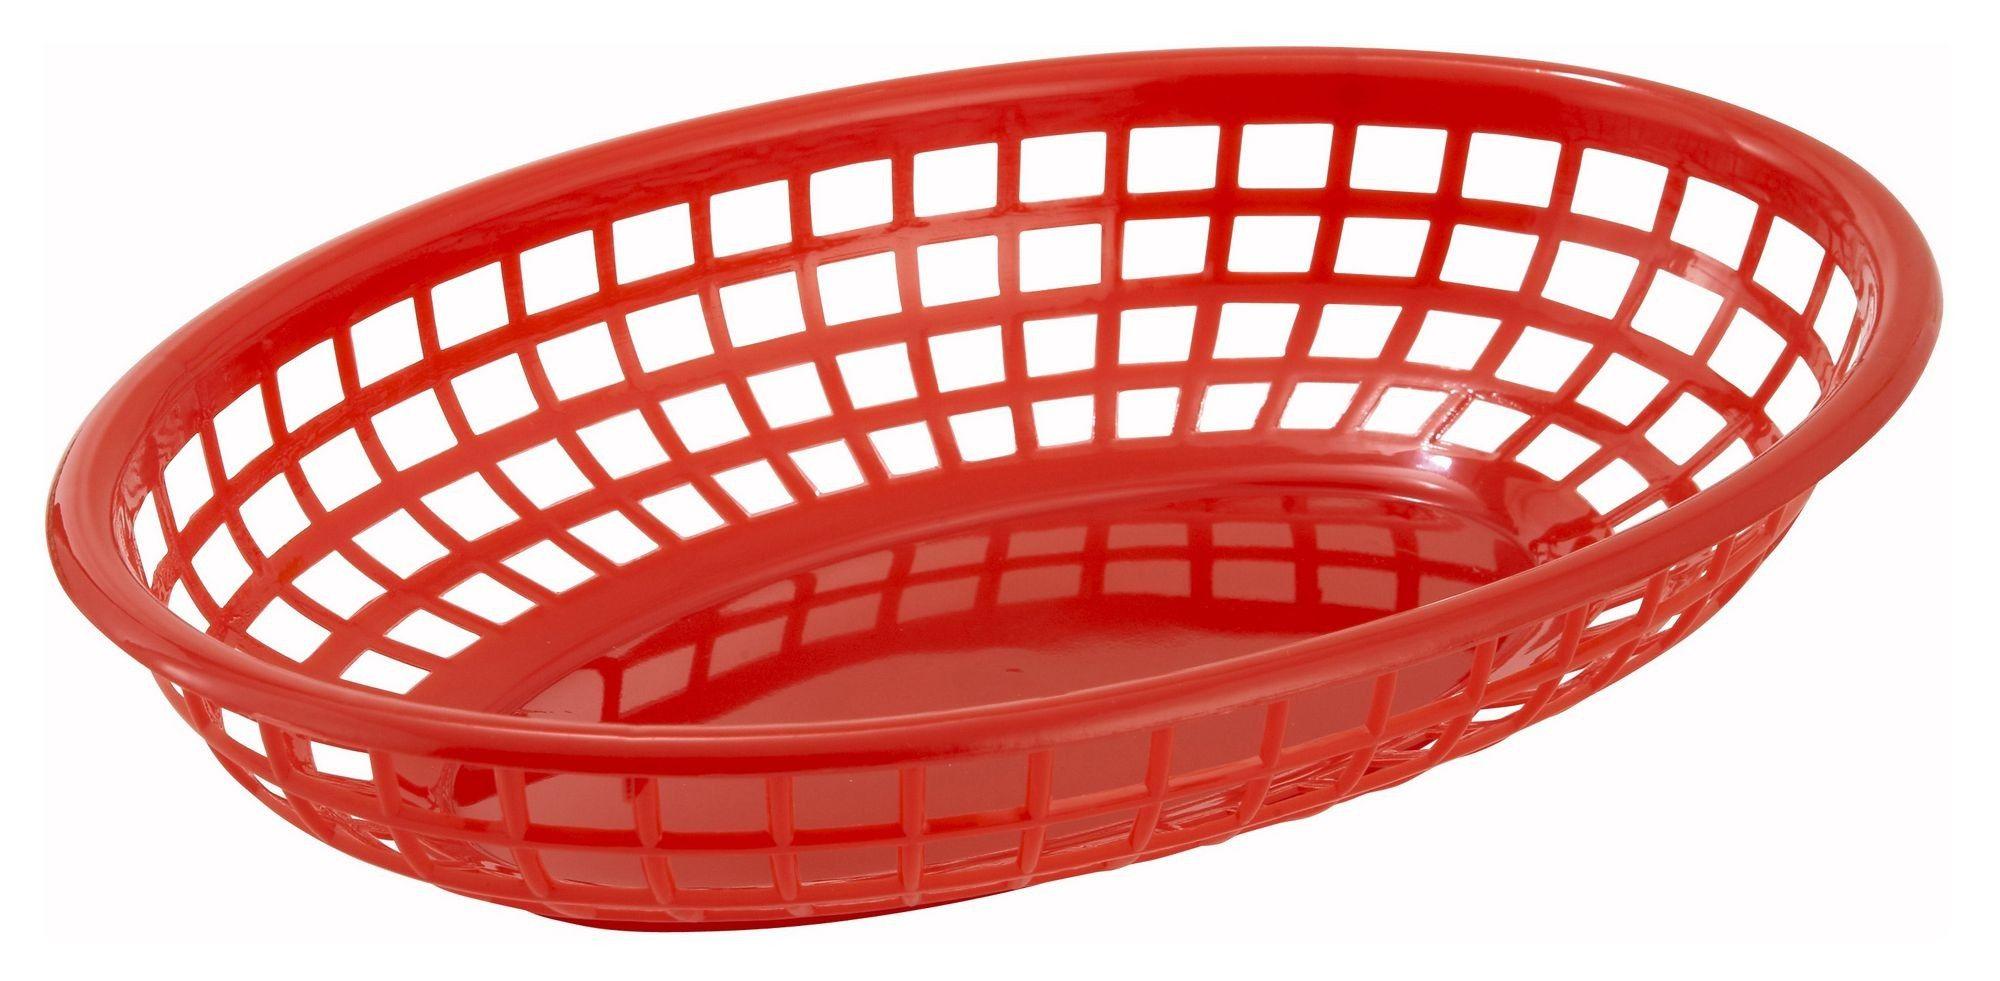 Food with Red Oval Logo - Red Oval Plastic Fast Food Basket - 9-1/2